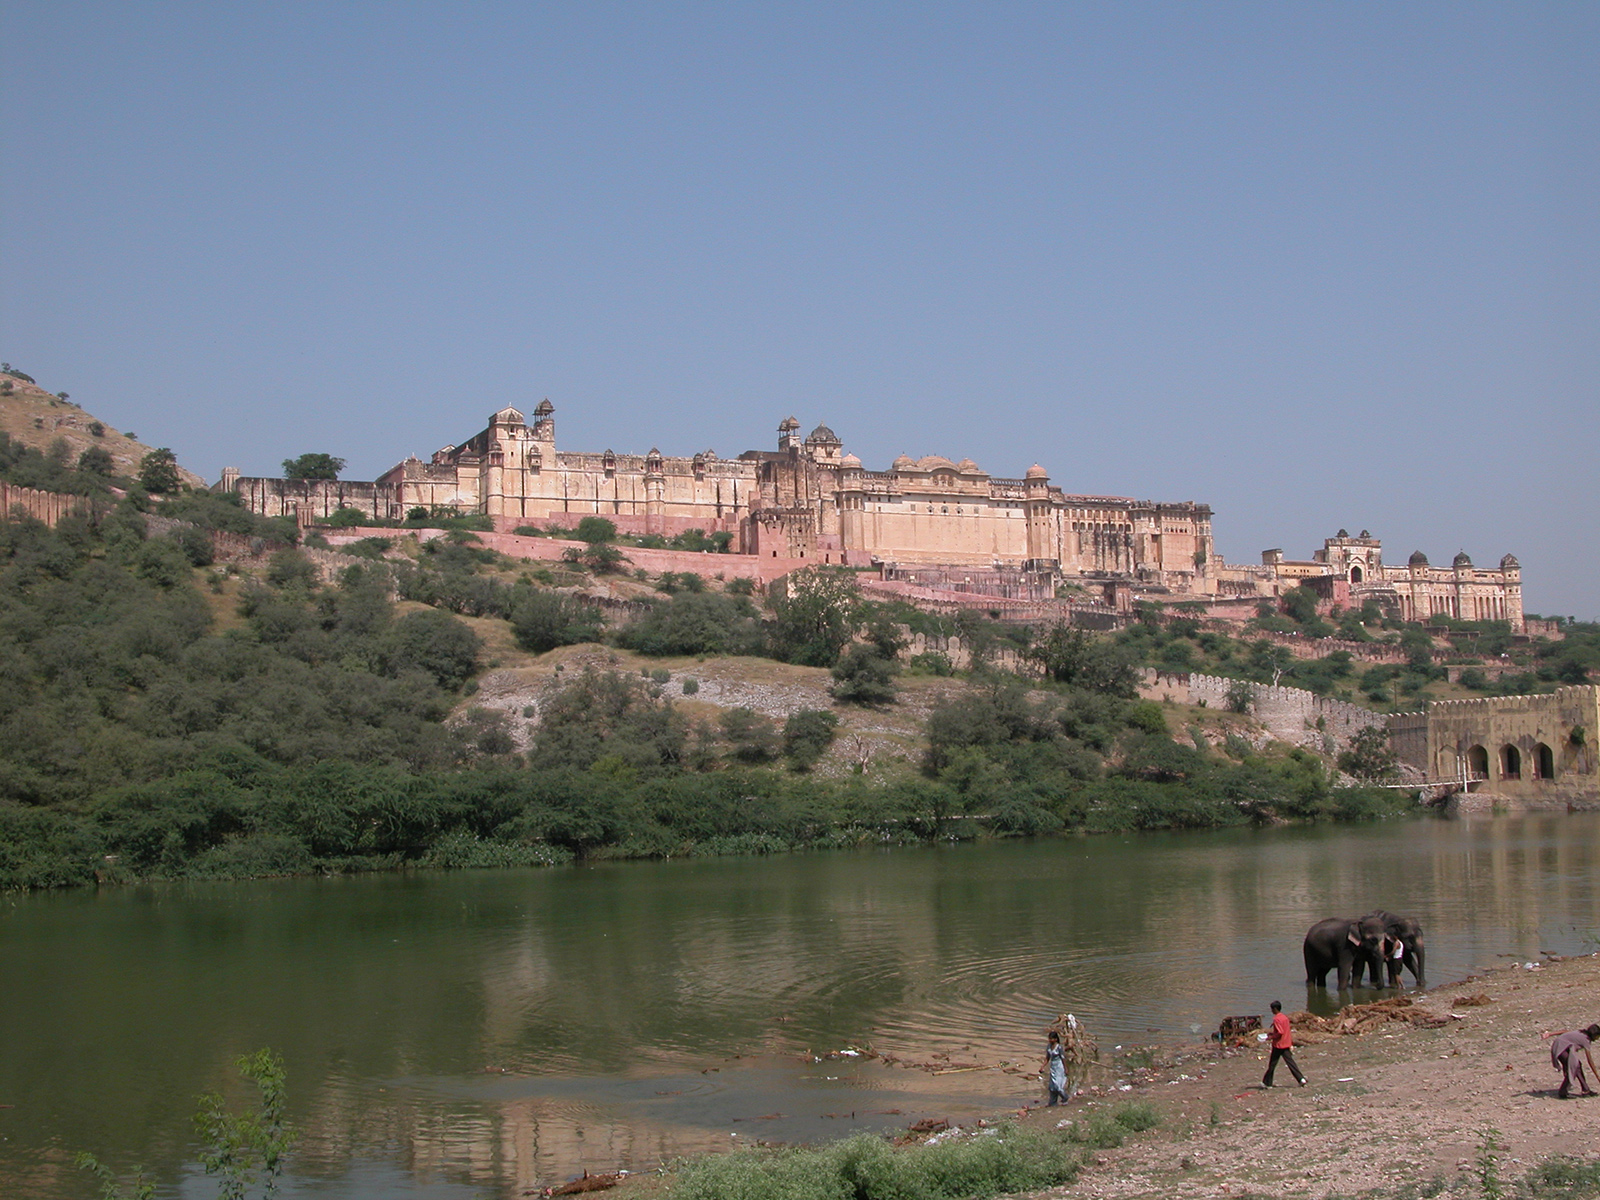 elephants watering in front of the Amber Fort near Jaipur, Rajasthan, India